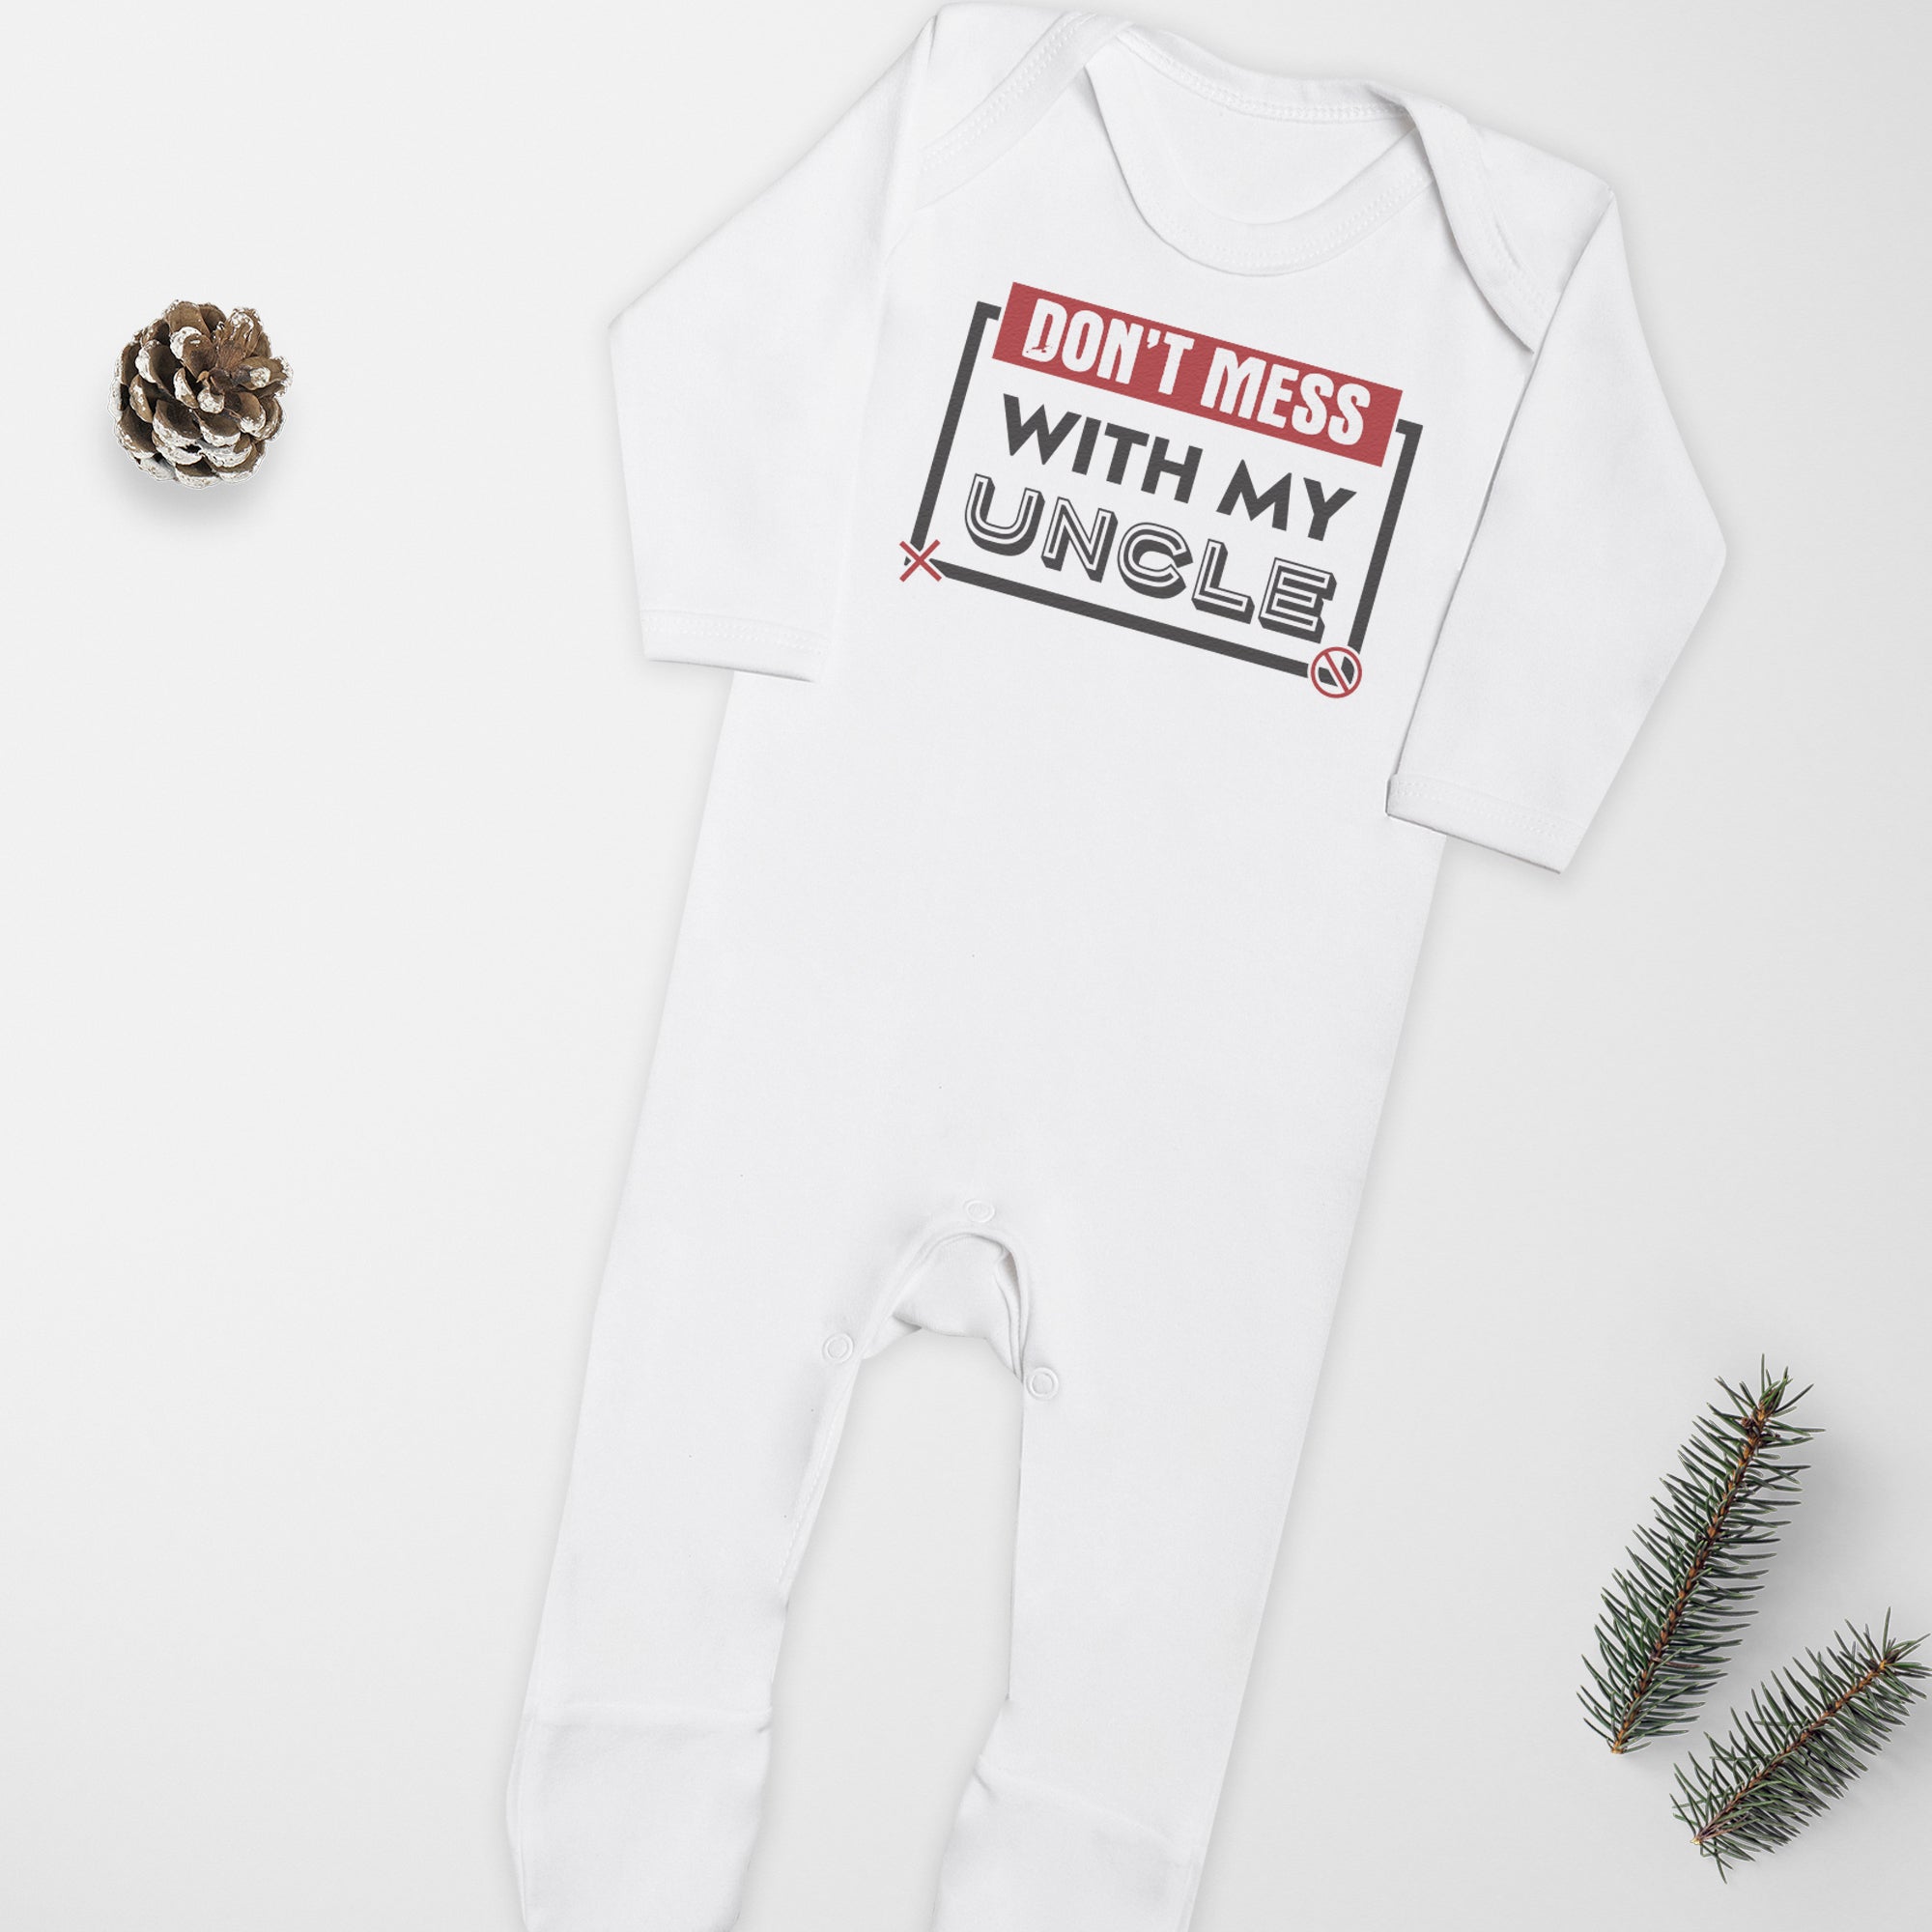 Pick A Family Name - Don't Mess With My Mummy, Auntie, Grandad and more - Baby Romper